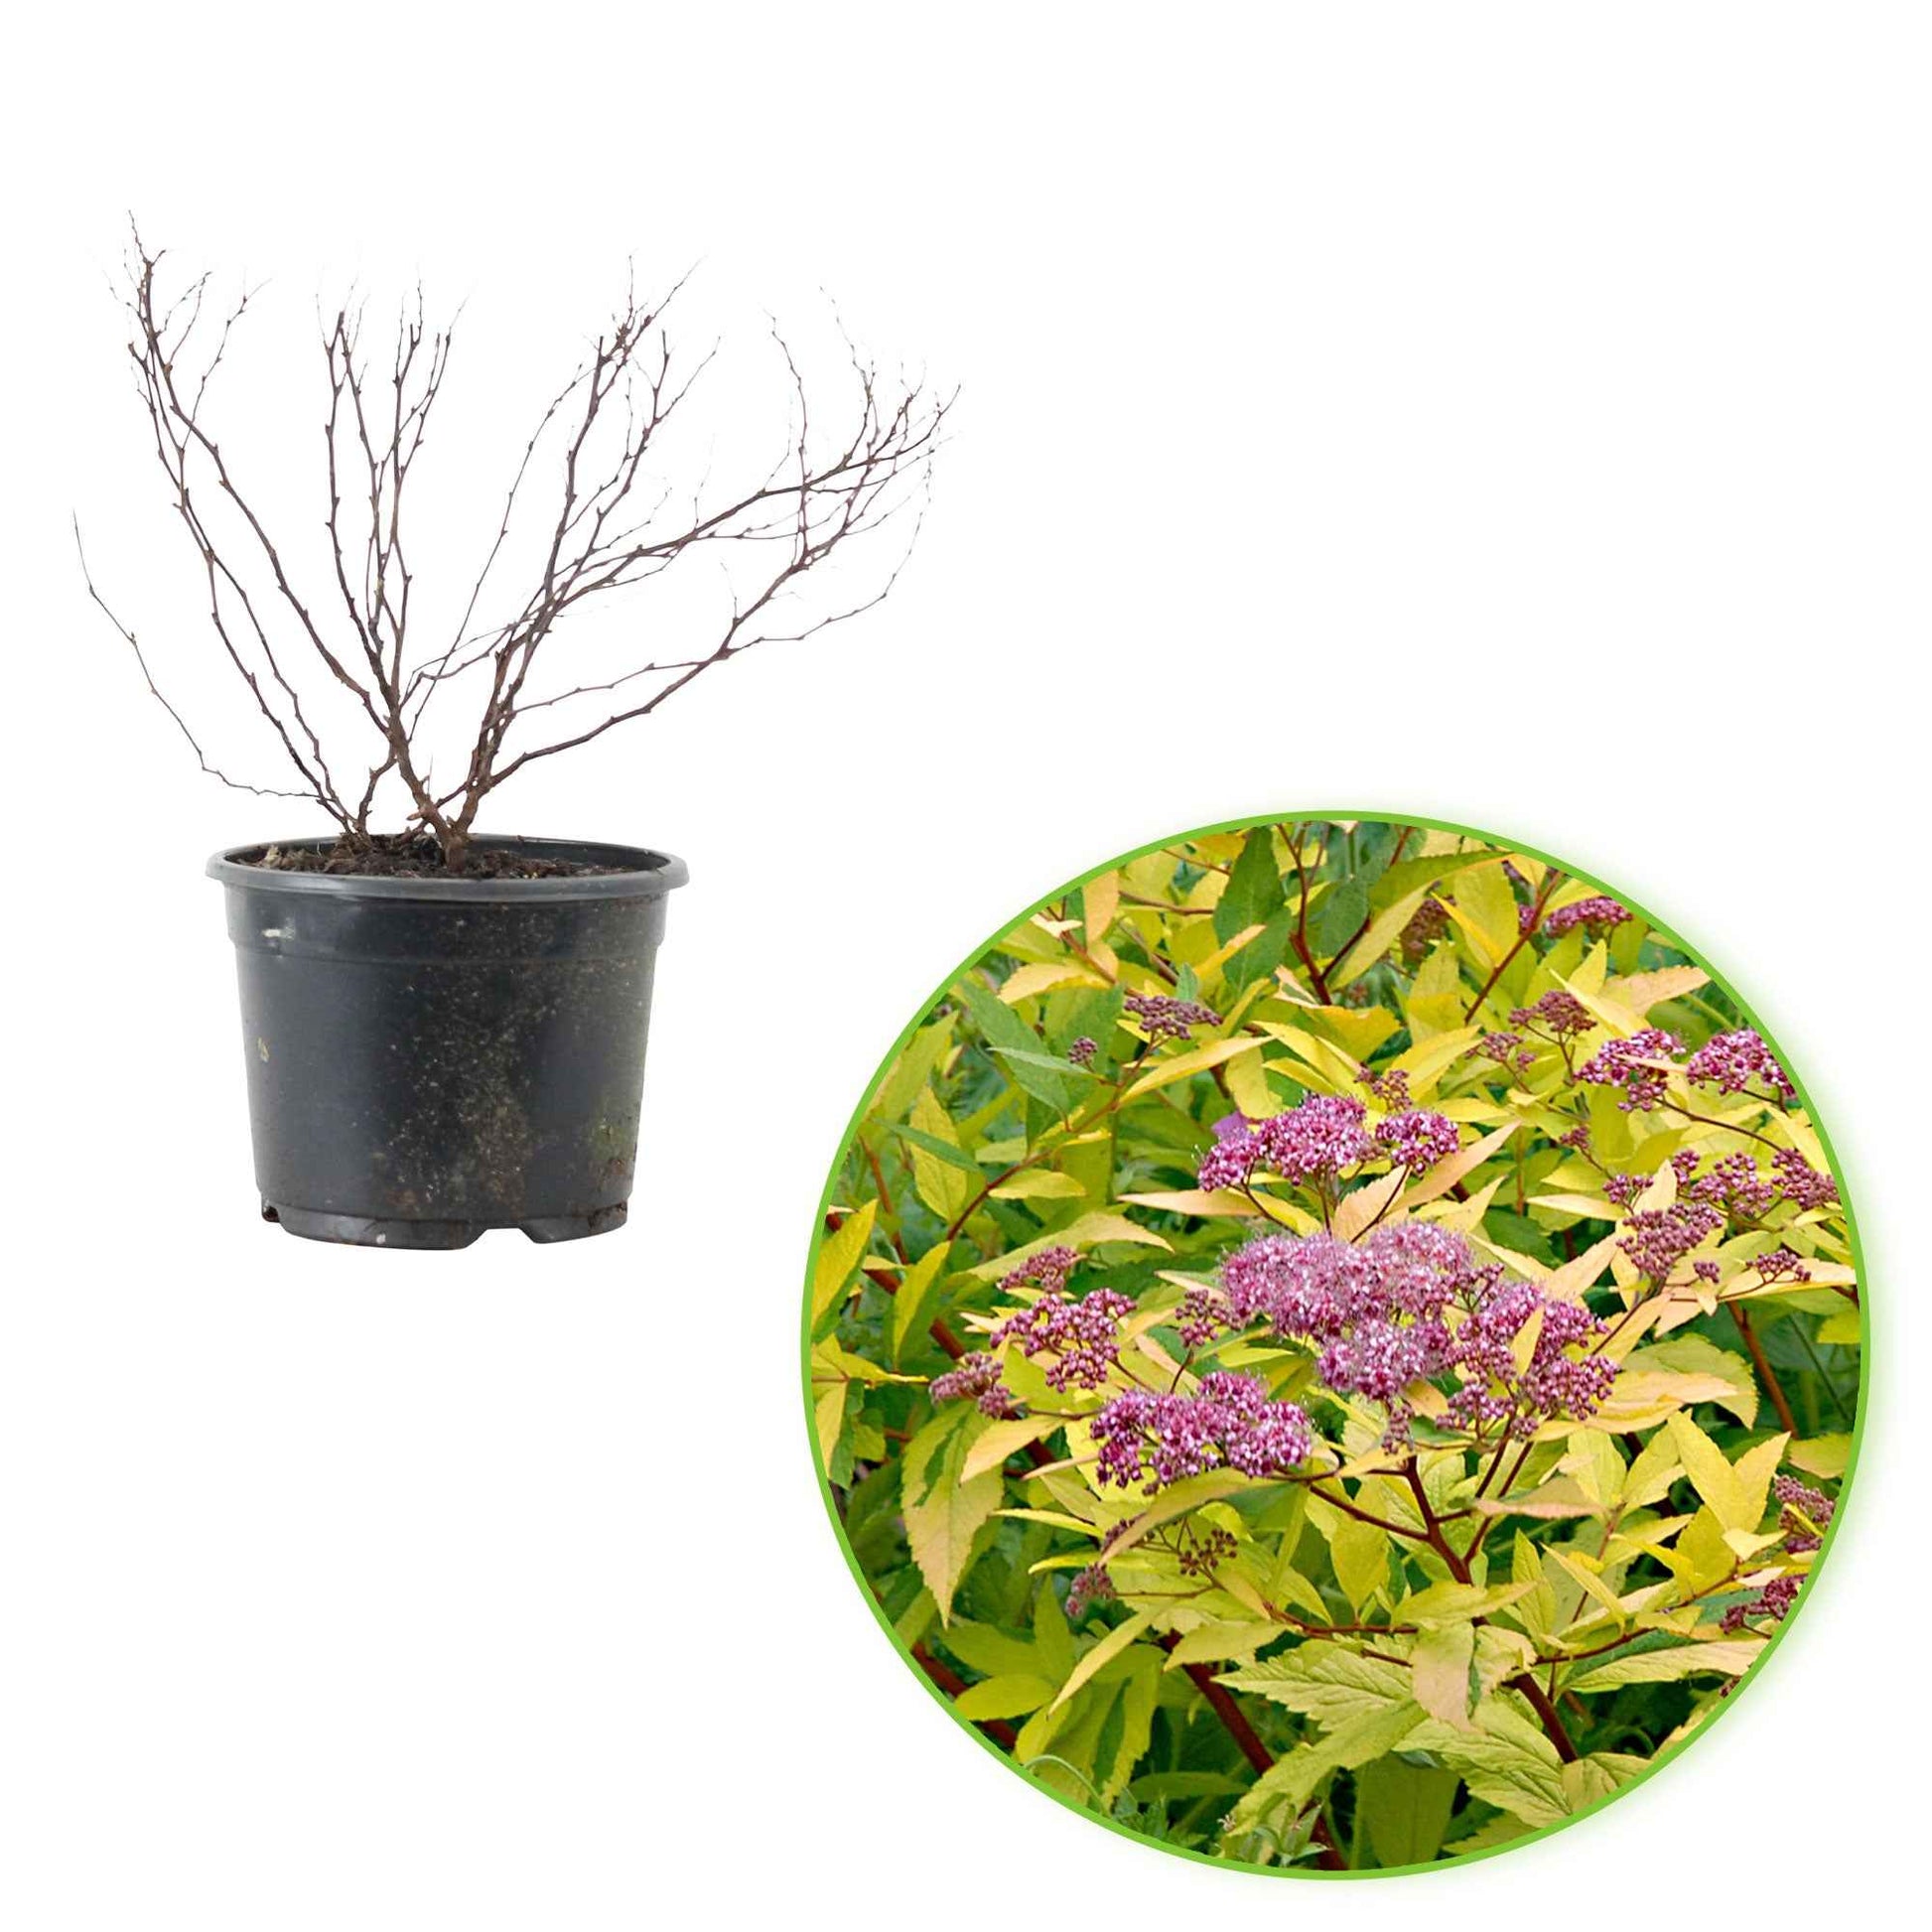 Spierstrauch 'Goldflame' - Spiraea japonica goldflame